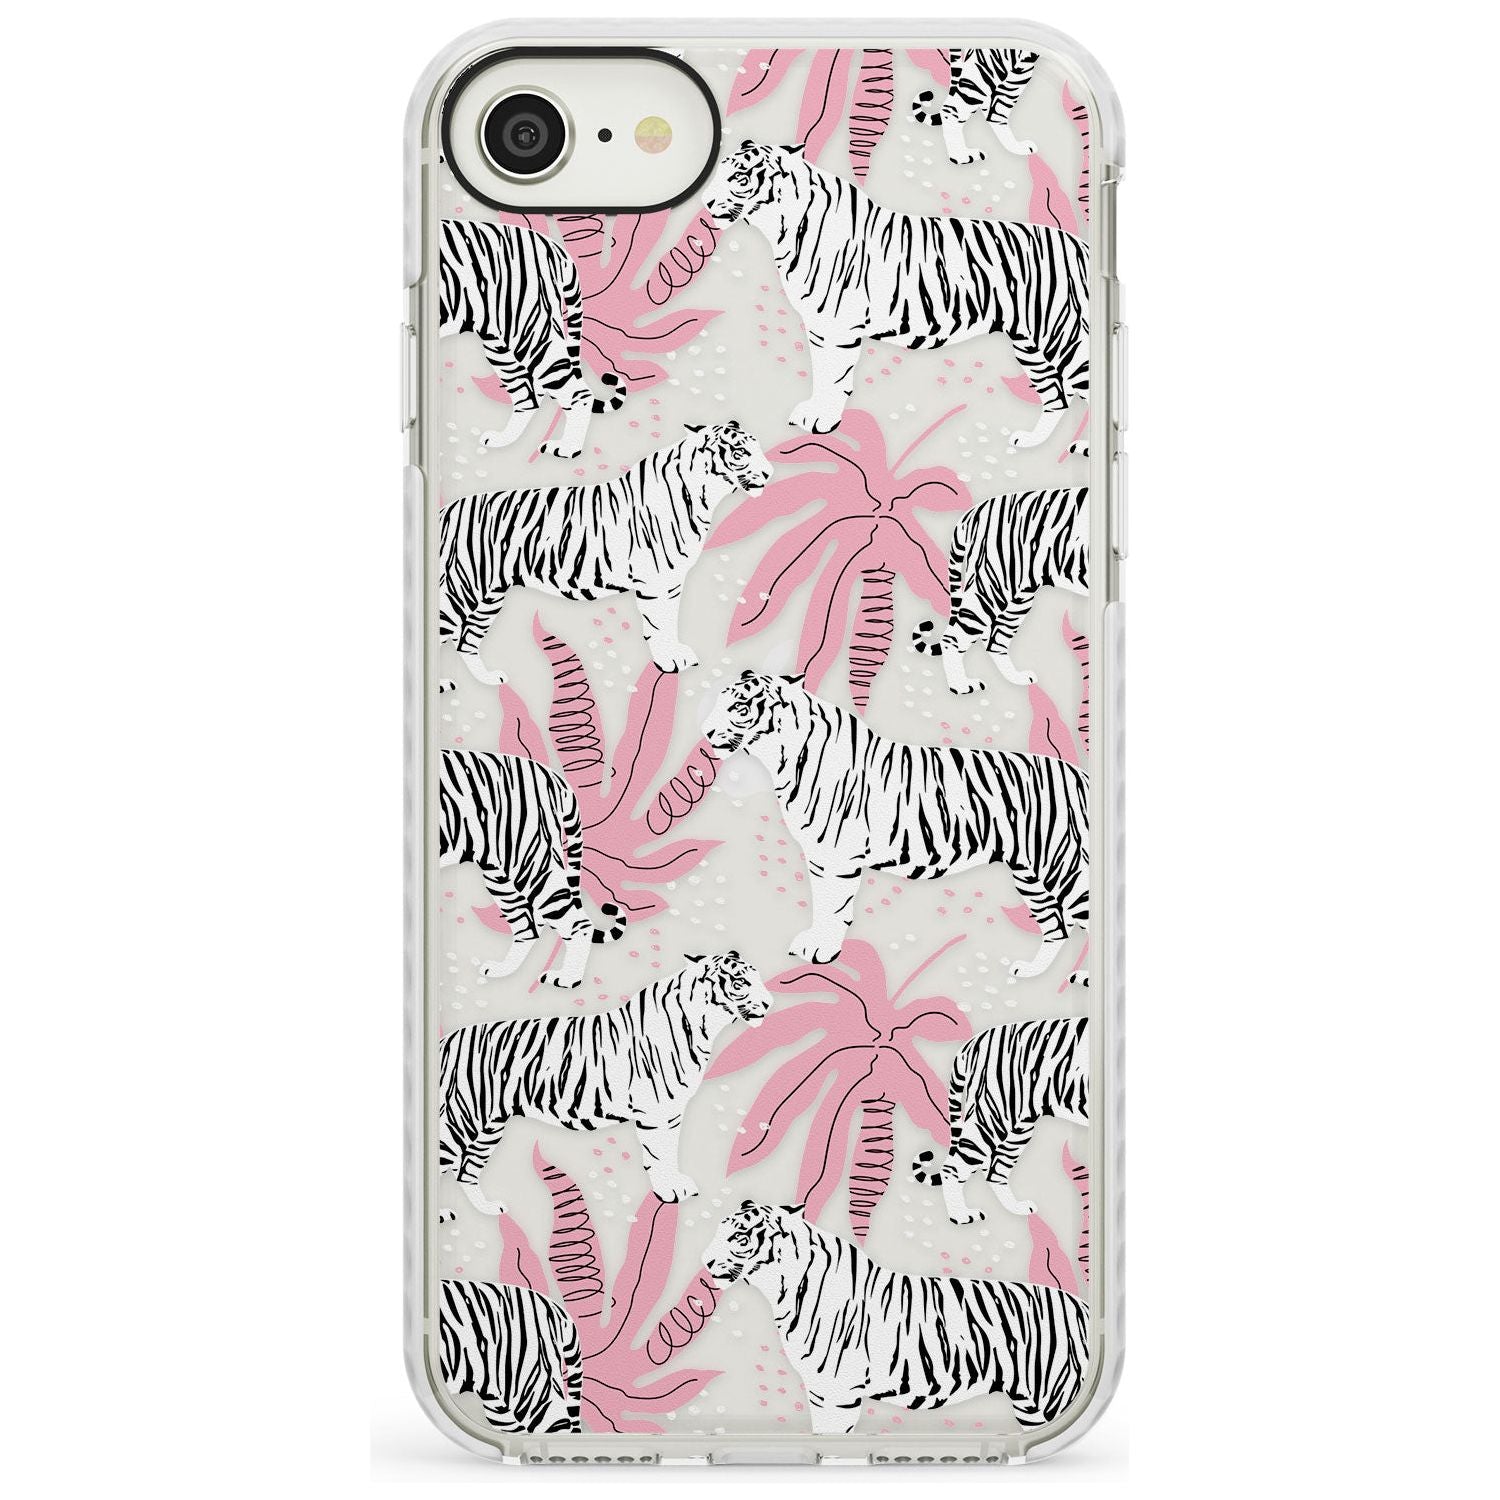 Tigers Within Impact Phone Case for iPhone SE 8 7 Plus